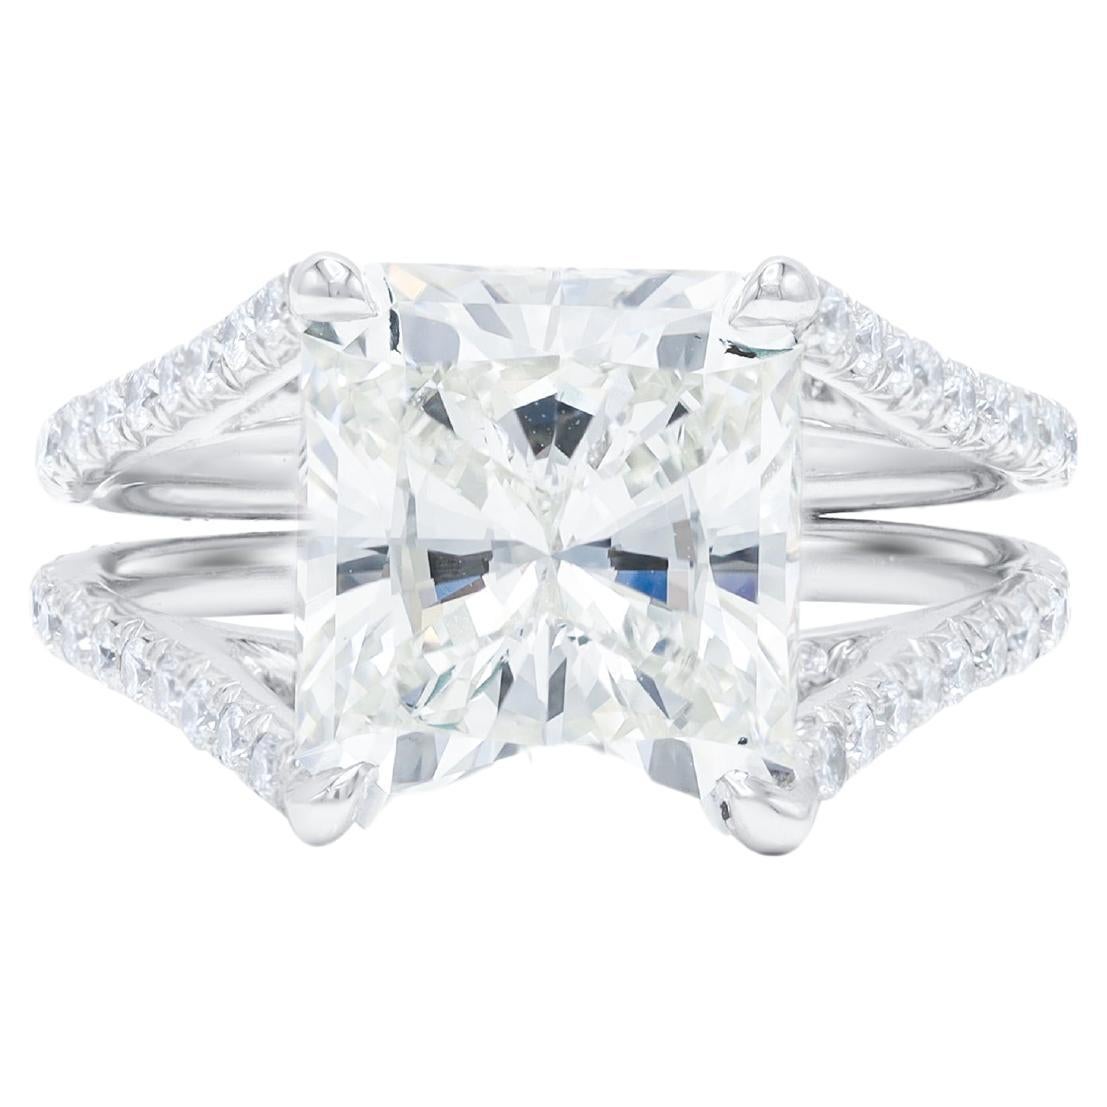 DIANA M. Platinum diamond ring featuring a center (J-IF) 4.18 ct radiant cut dia For Sale